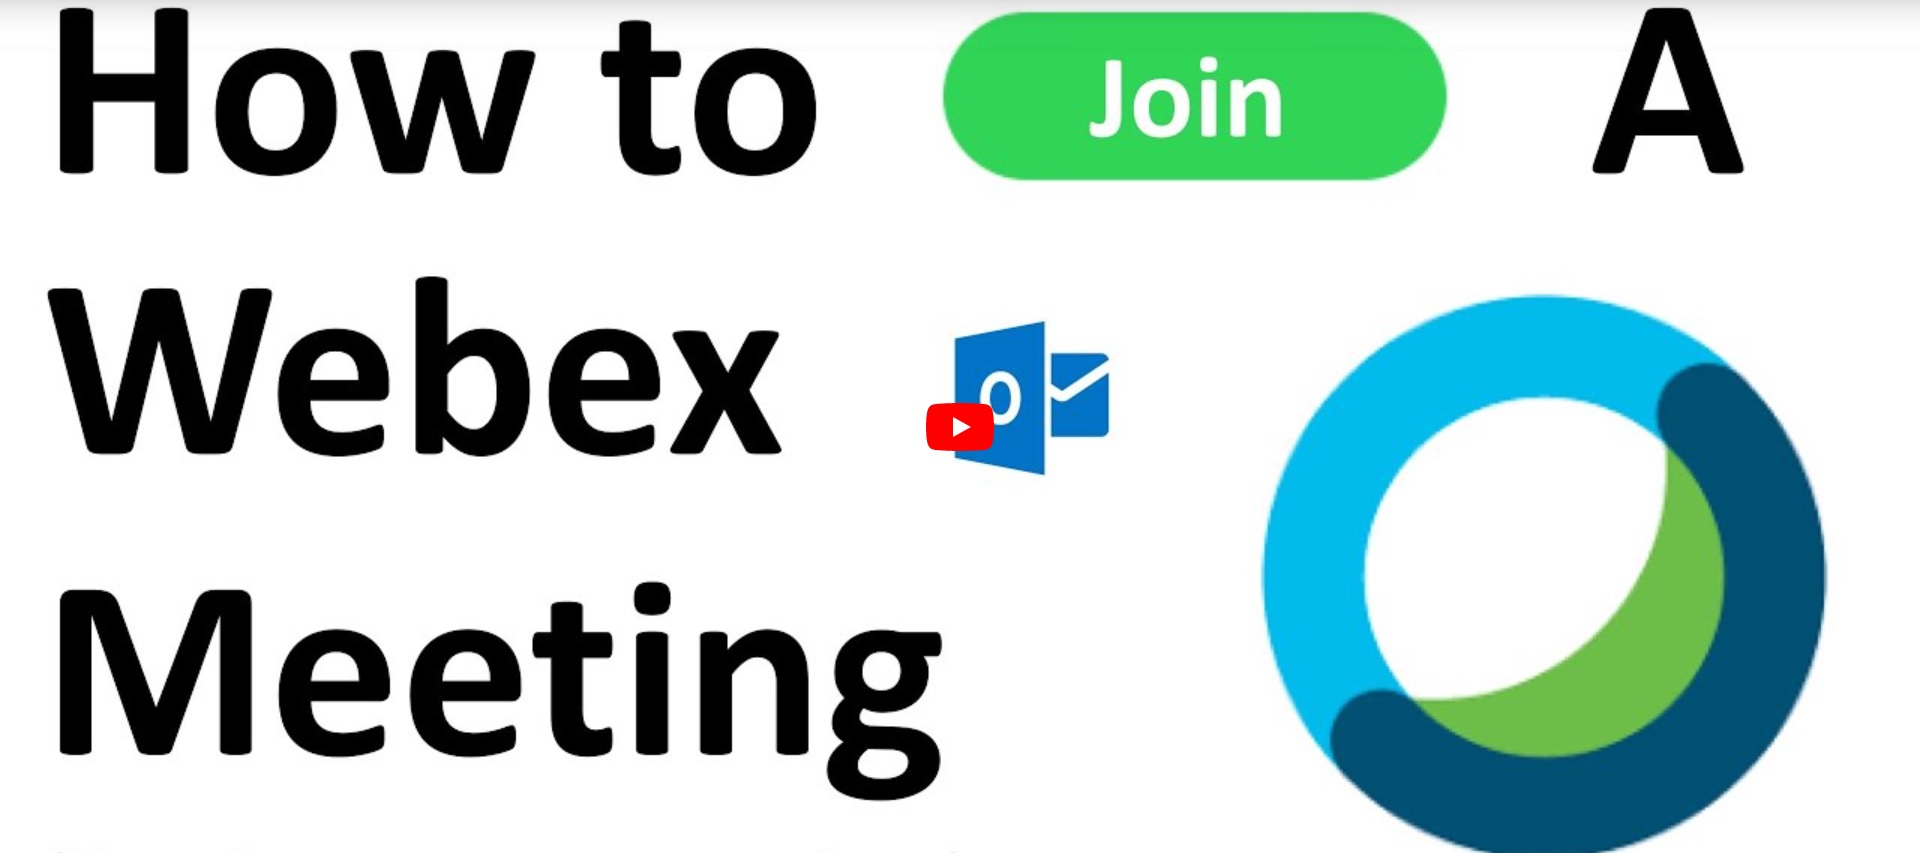 How to Join a Webex Video Meeting